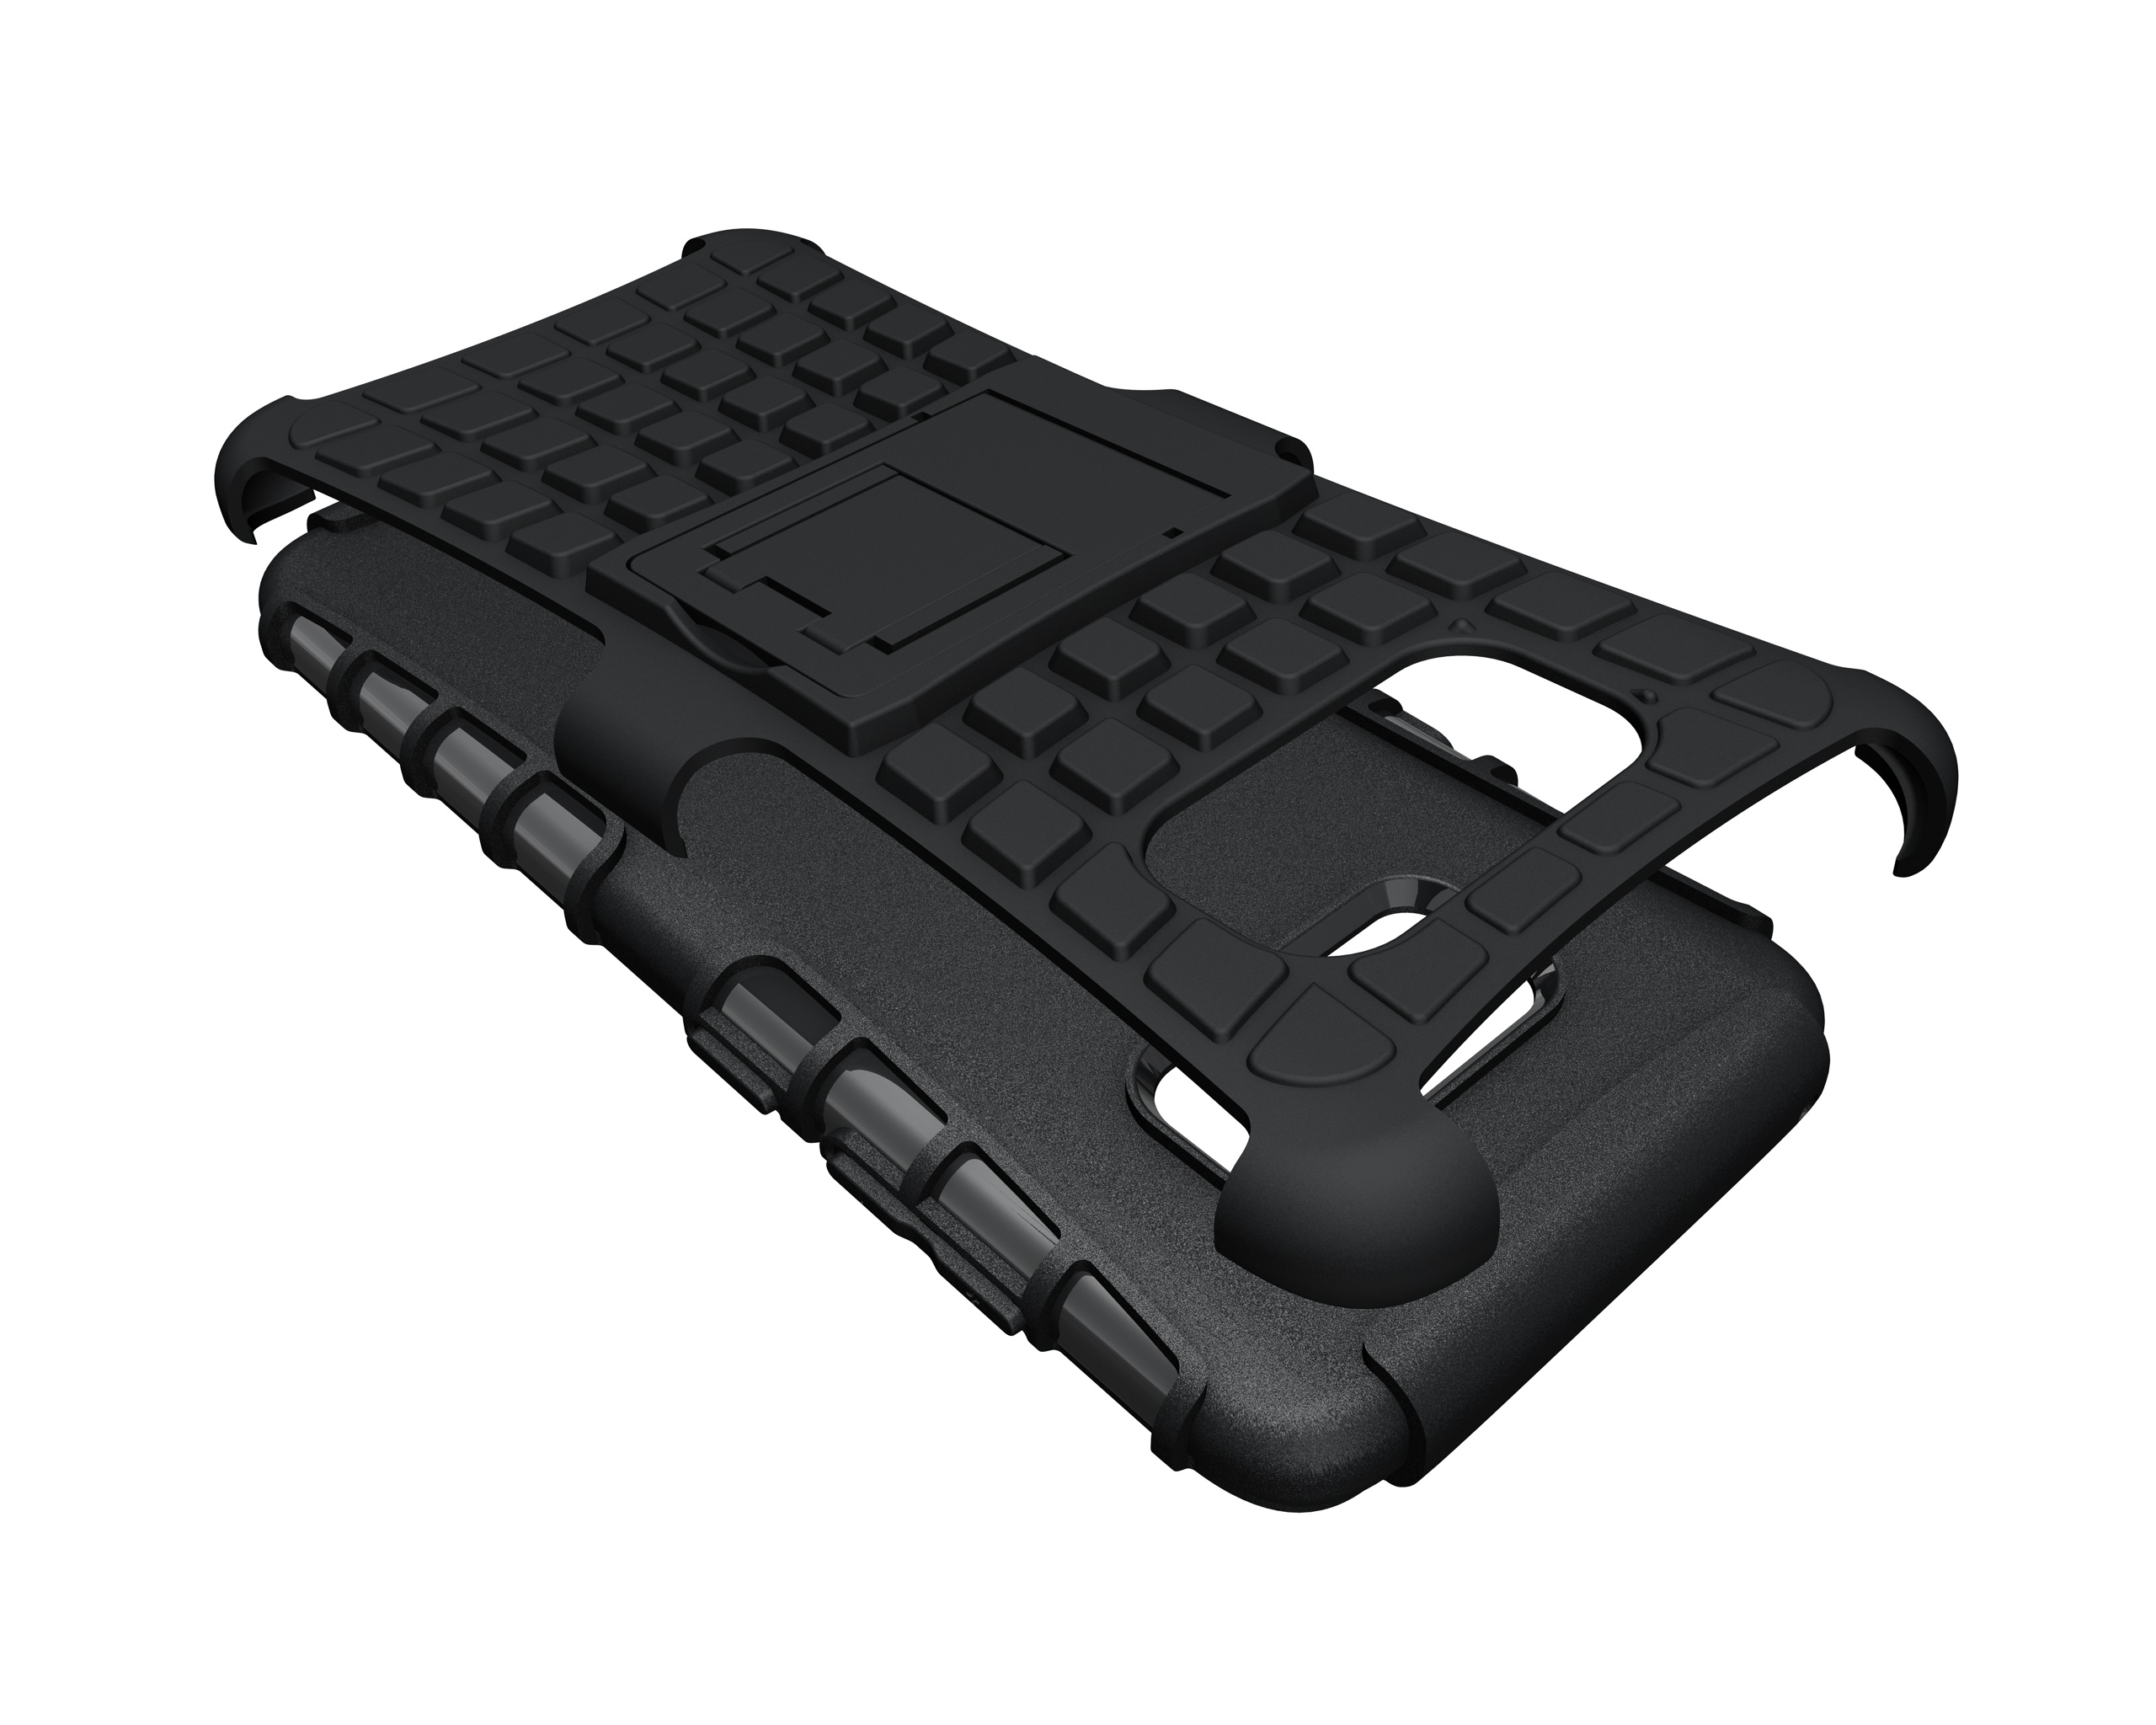 Bakeeytrade-2-in-1-Armor-Kickstand-TPU-PC-Case-for-Samsung-Galaxy-S8-Plus-1238929-7